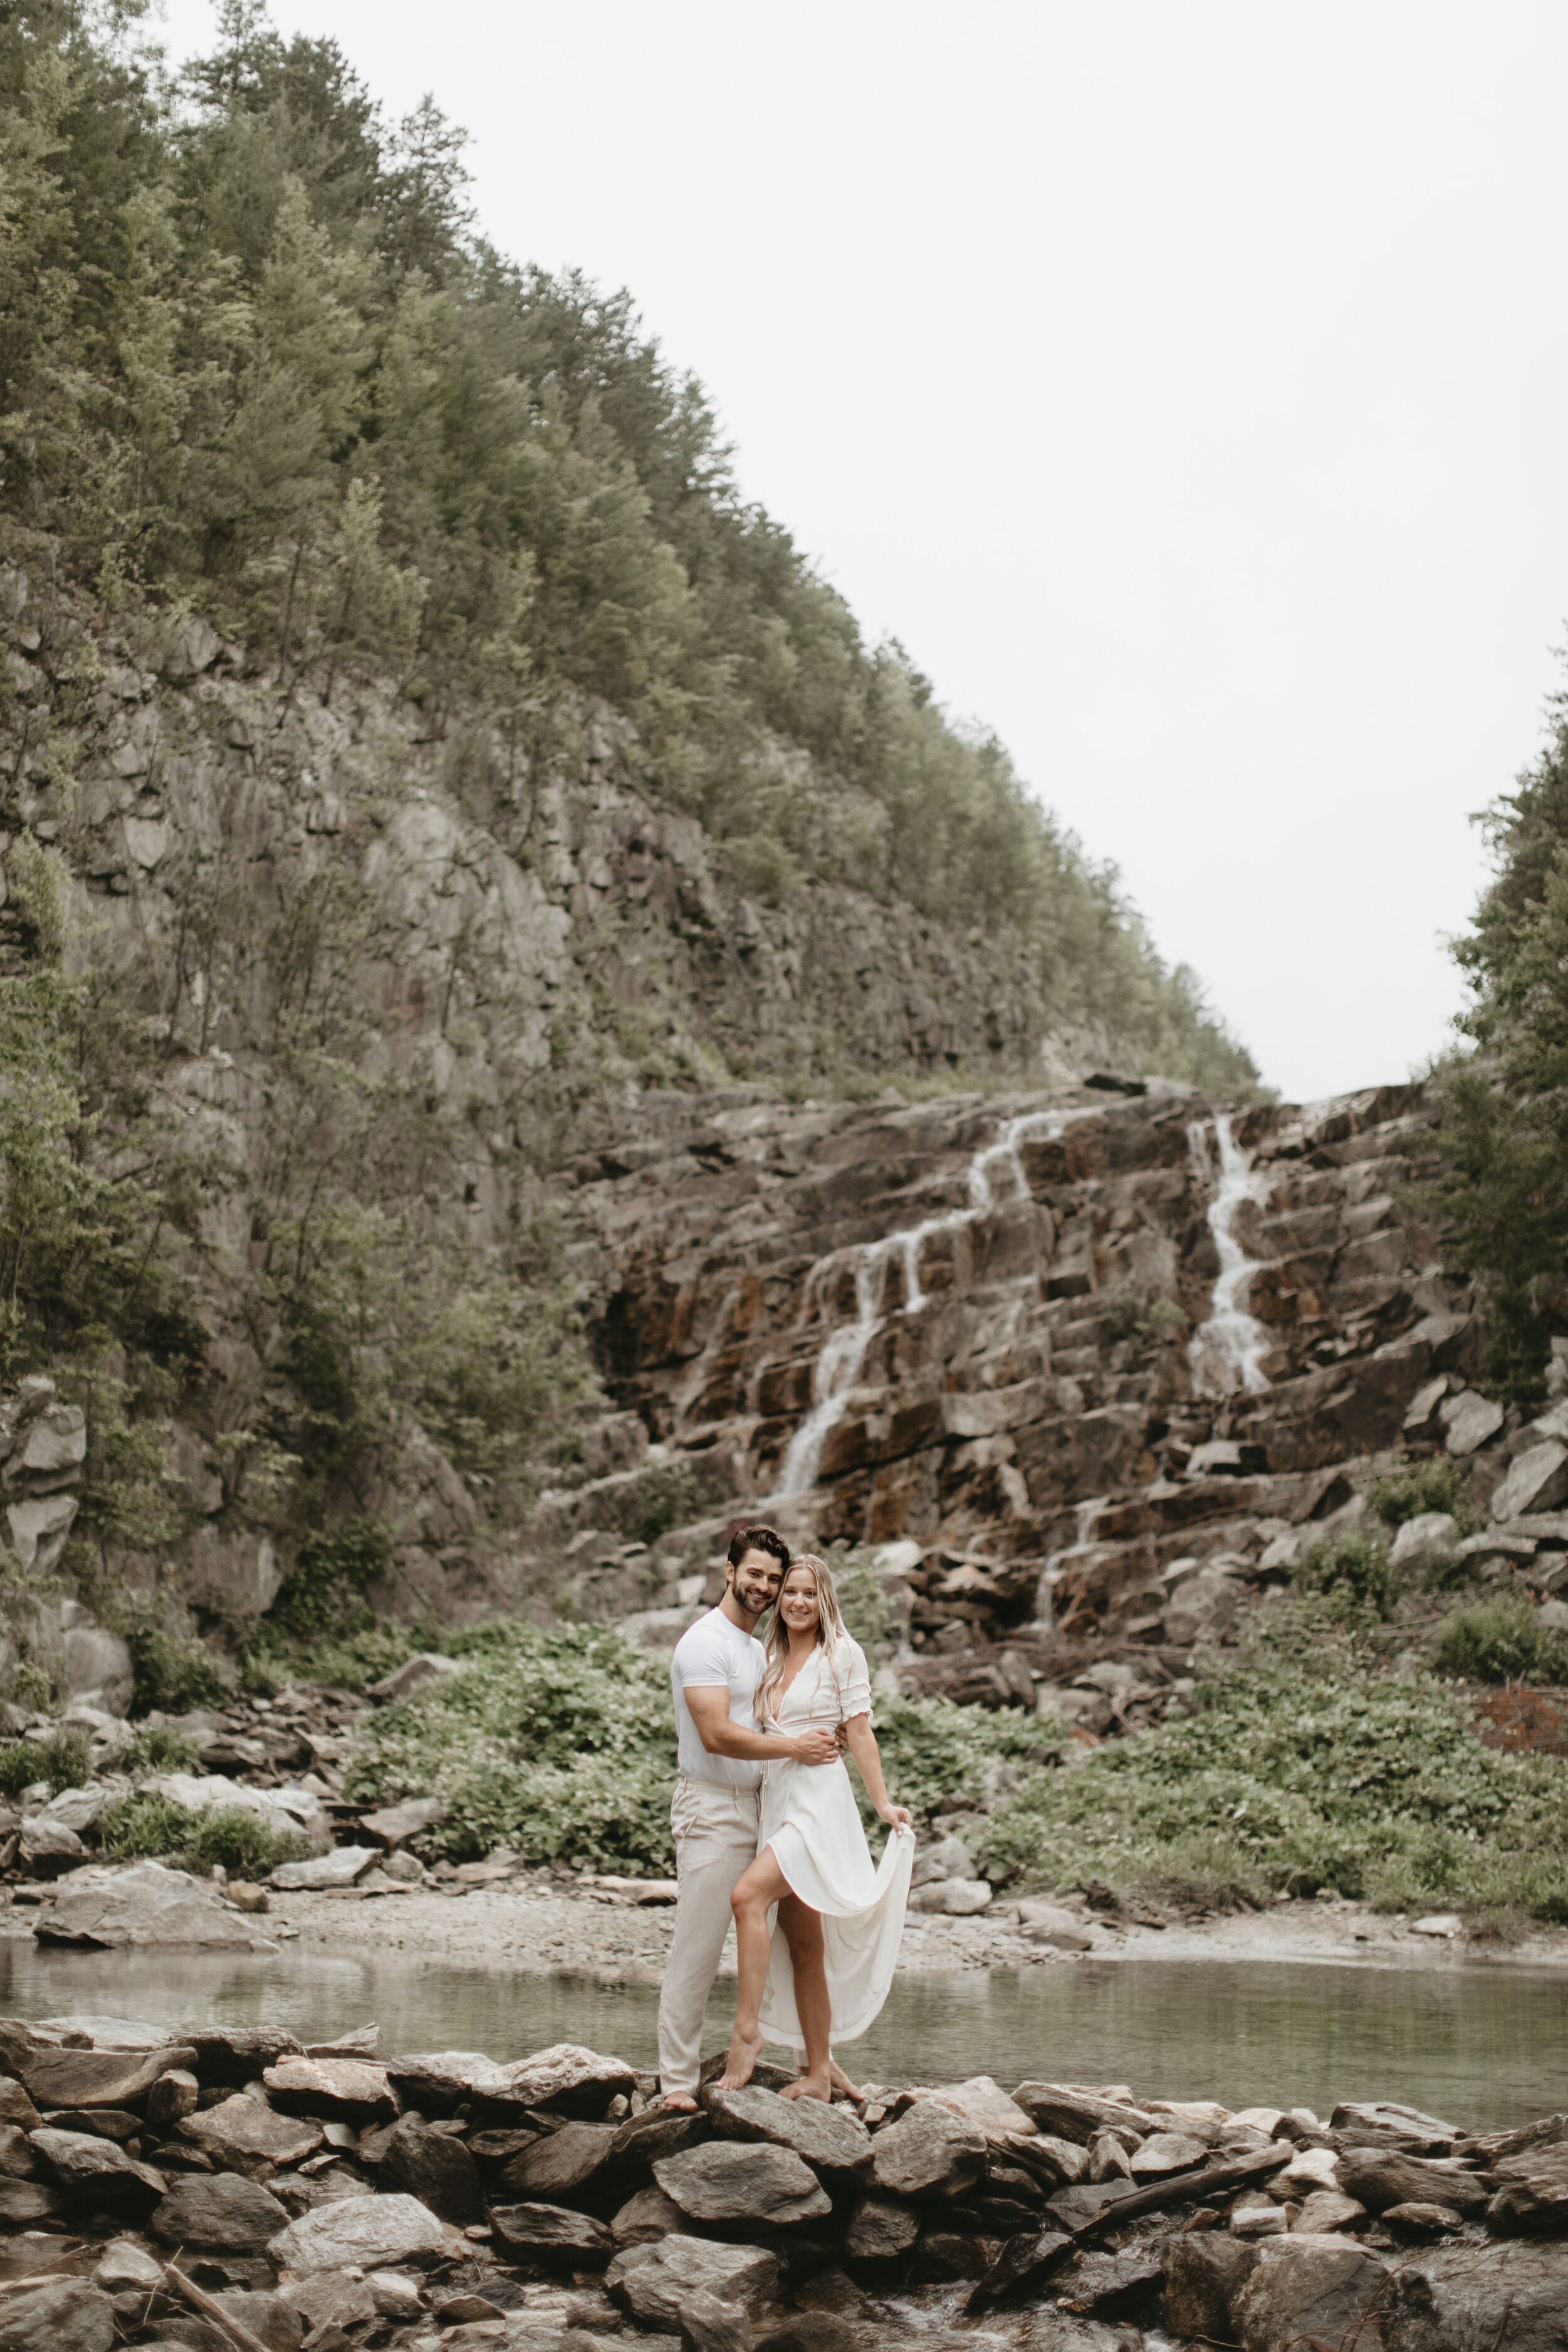 Nicole-Daacke-Photography-michaux-state-forest-elopement-adventure-engagement-session-pennsylvania-elopement-pa-elopement-photographer-gettysburg-photographer-state-park-elopement-engagement-session-pennsylvania-waterfall-160.jpg